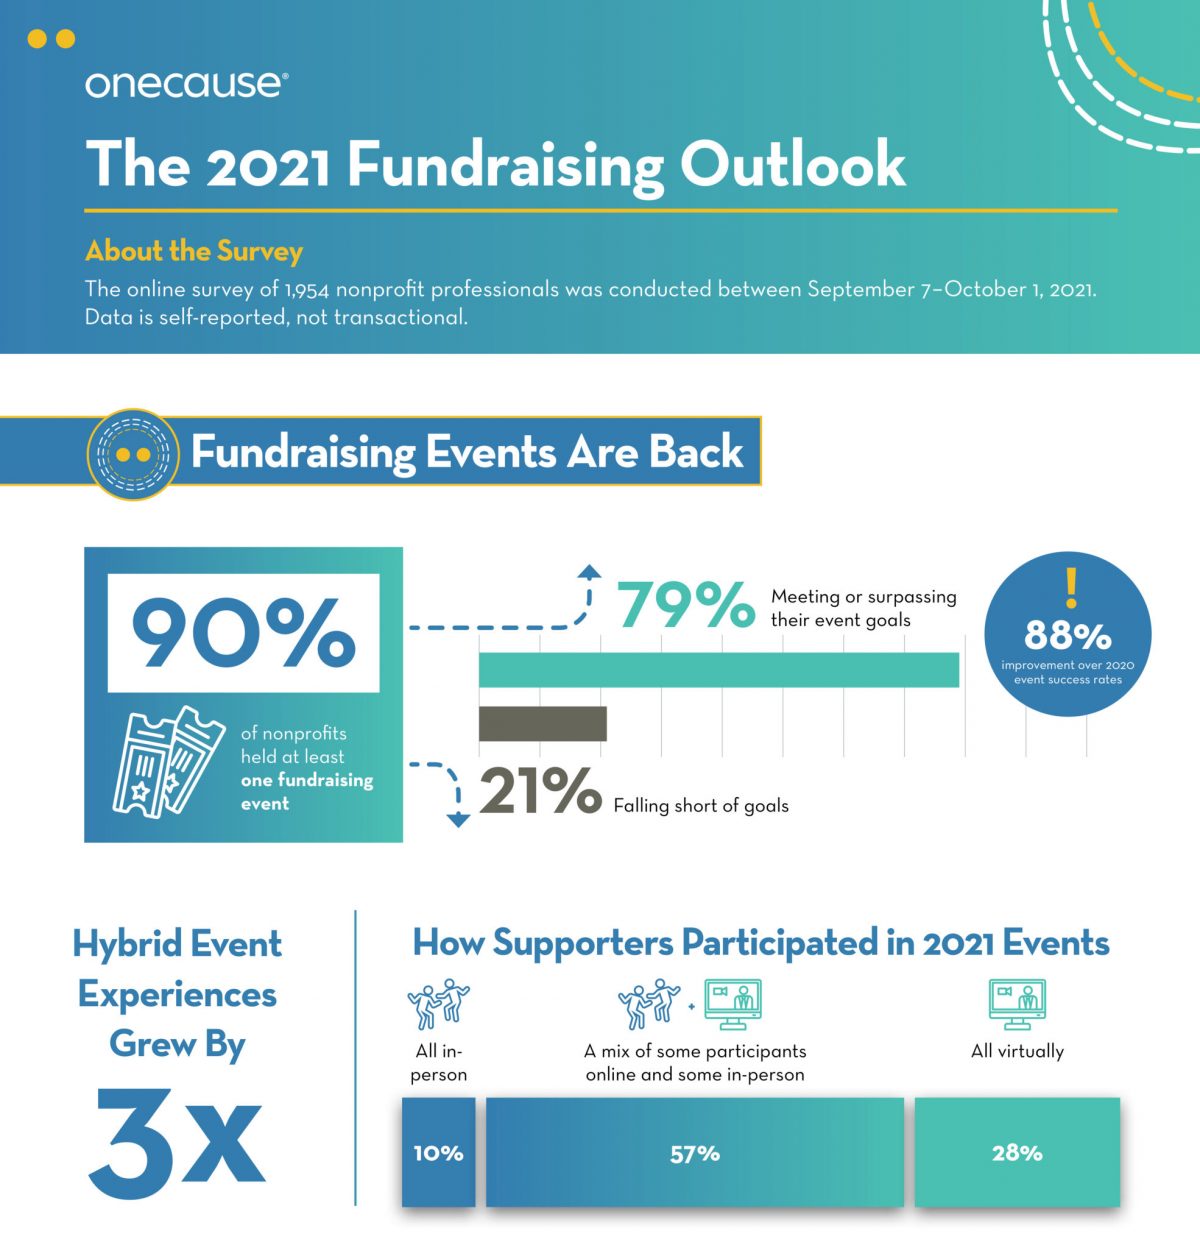 The 2022 Fundraising Outlook